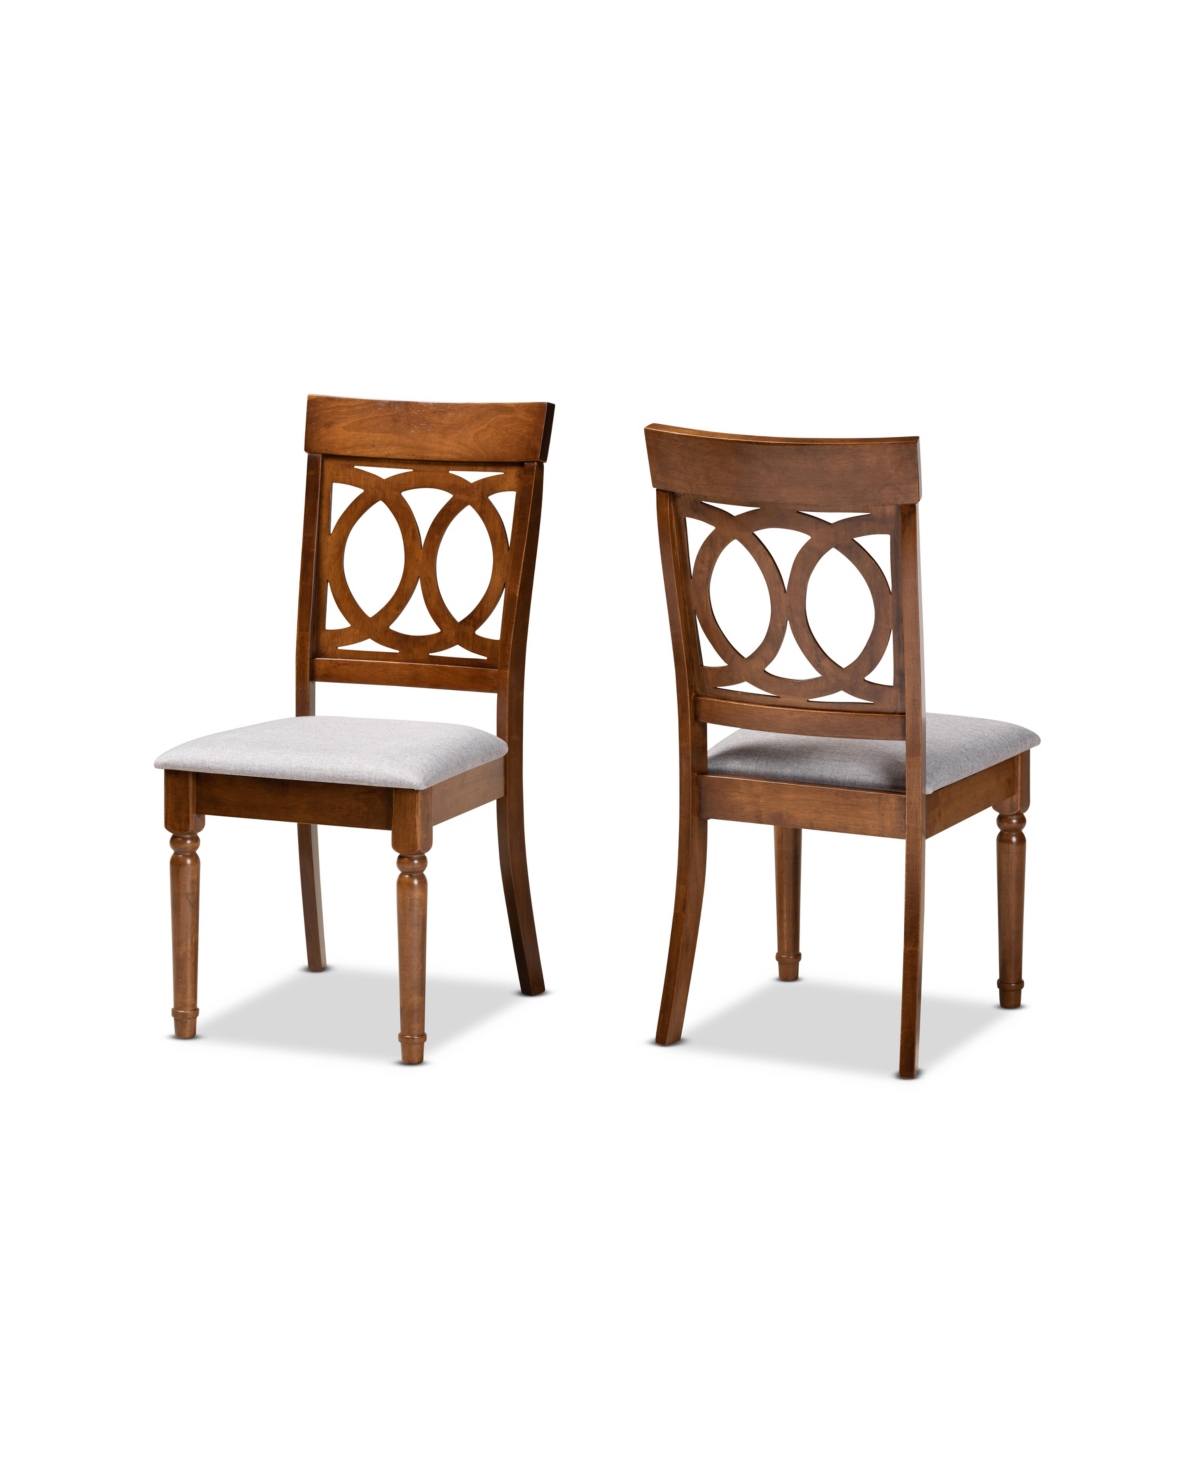 Baxton Studio Lucie Modern And Contemporary Wood Dining Chair Set, 2 Piece In Gray/walnut Brown